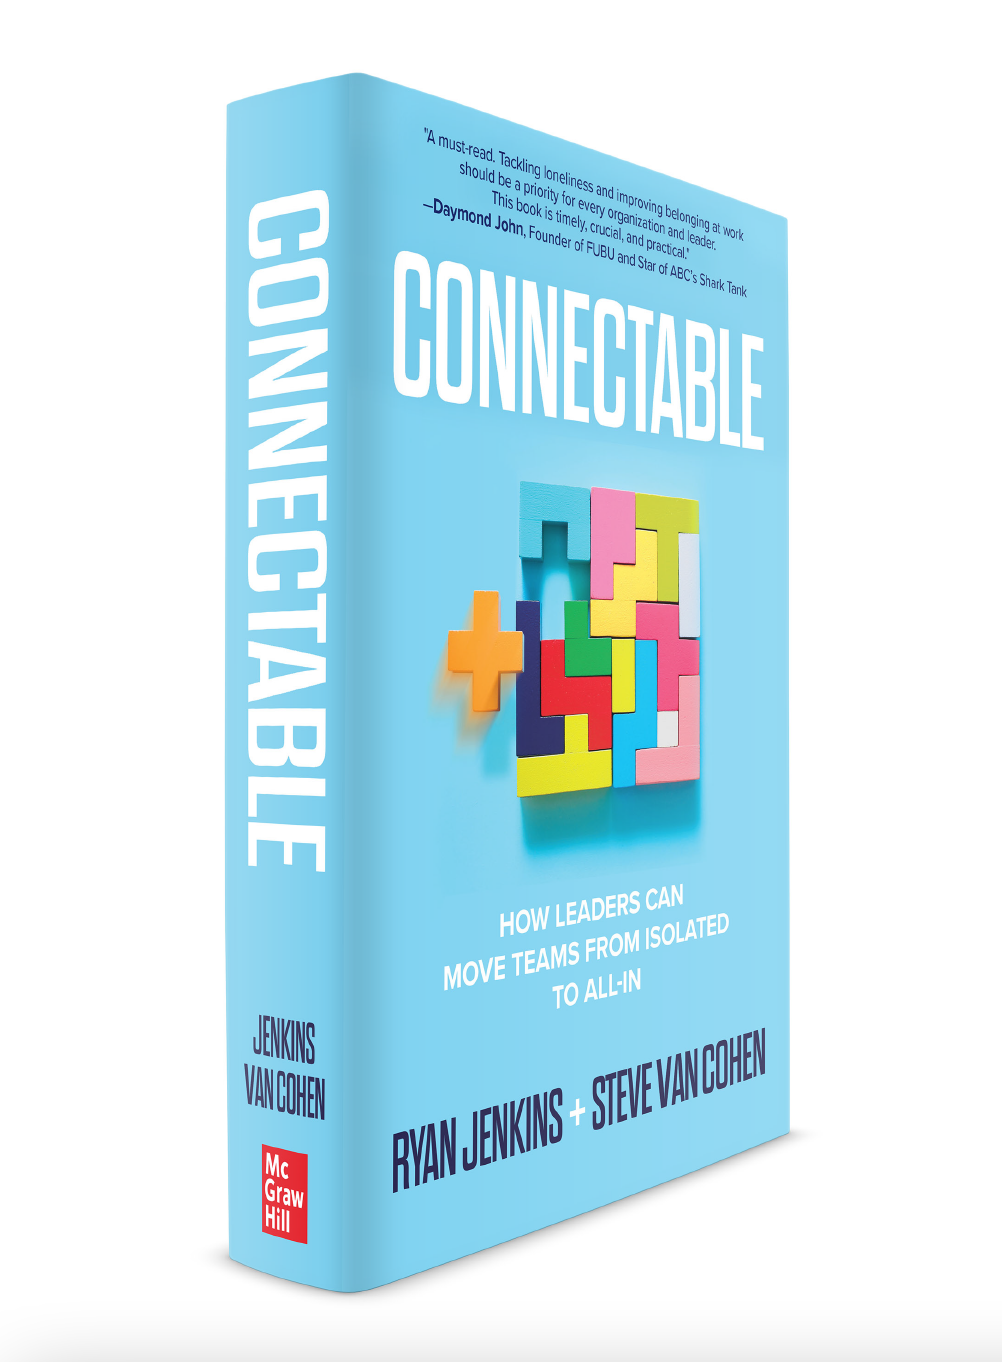 Connectable - How Leaders Can Move Teams From Isolated to All-In (3D) copyConnectable - How Leaders Can Move Teams From Isolated to All-In (3D)